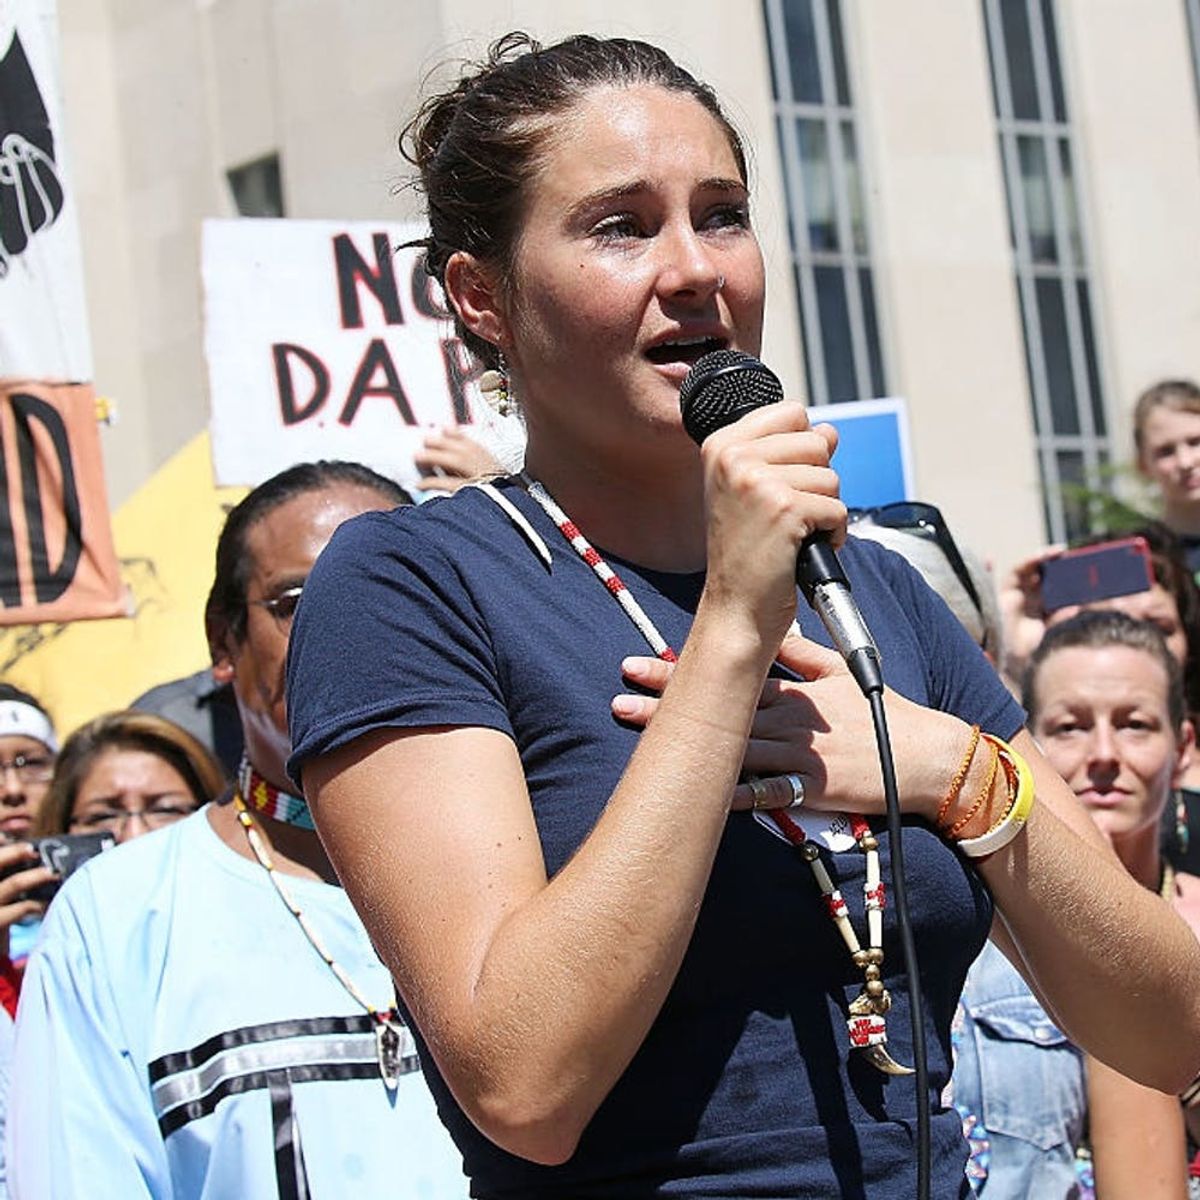 Nightly Newsy:  A Li’l Victory for the Celeb-Protested #NoDAPL + More